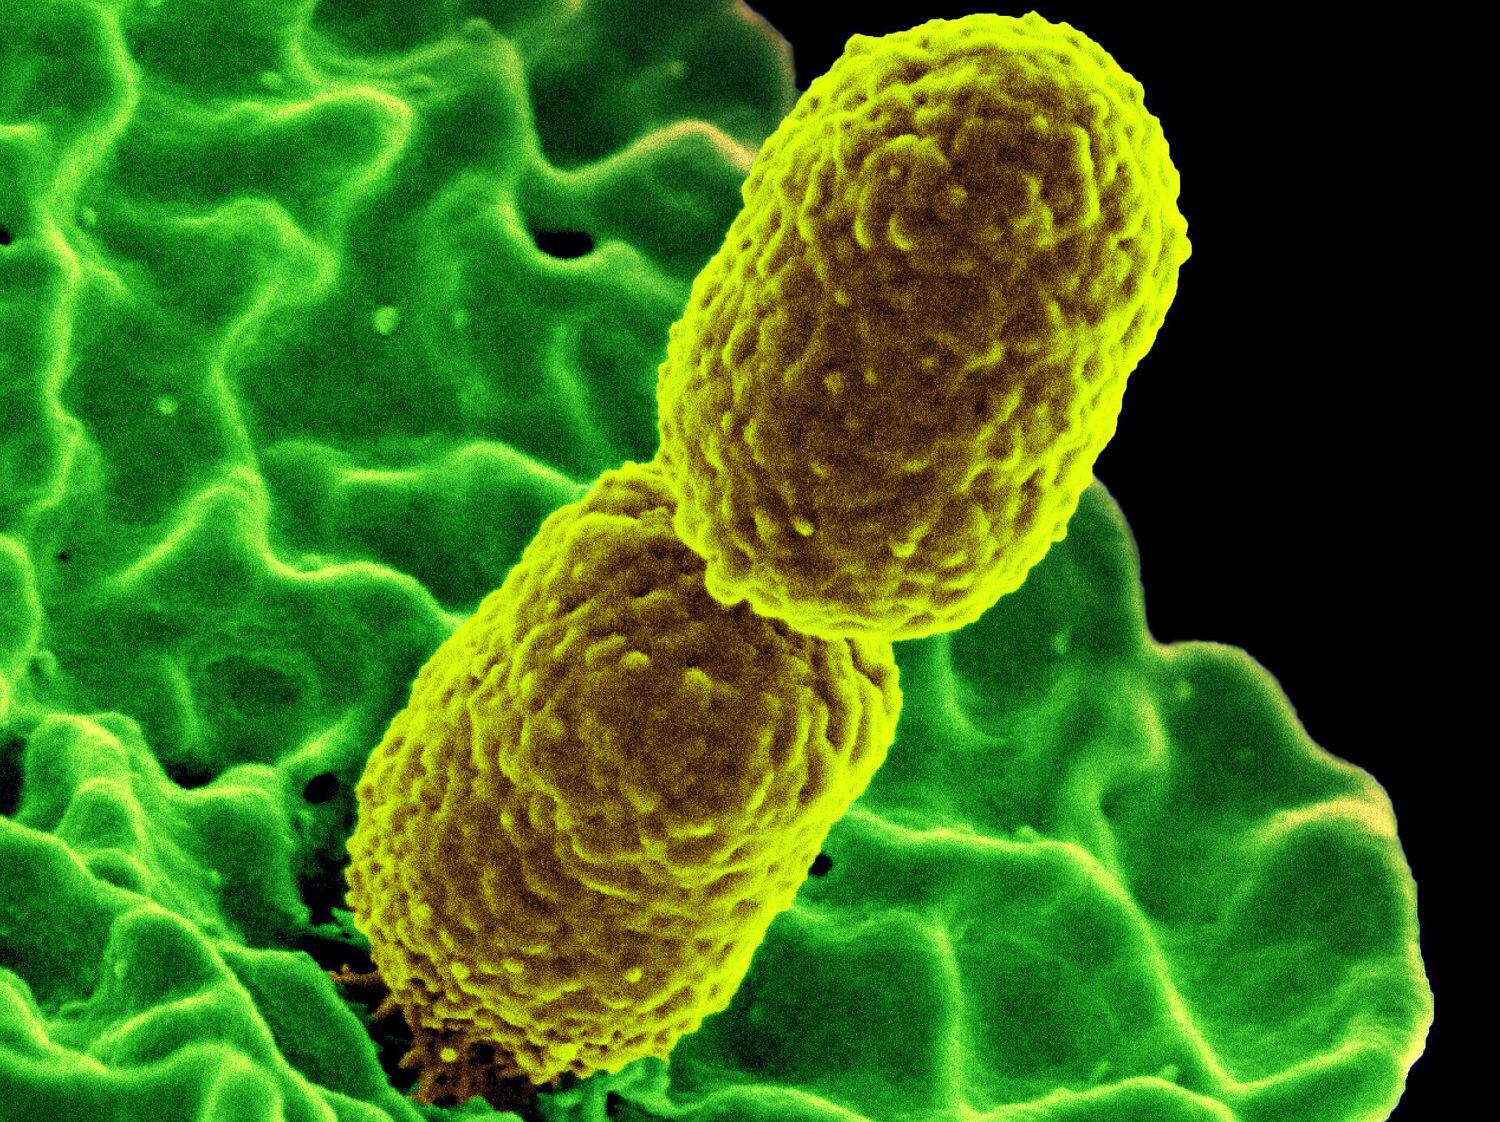 The intestinal inhabitant Klebsiella pneumoniae is one of the most dreaded hospital germs. © NIAIDCREDITNational Institute of Allergy and Infectious Diseases (NIAID)